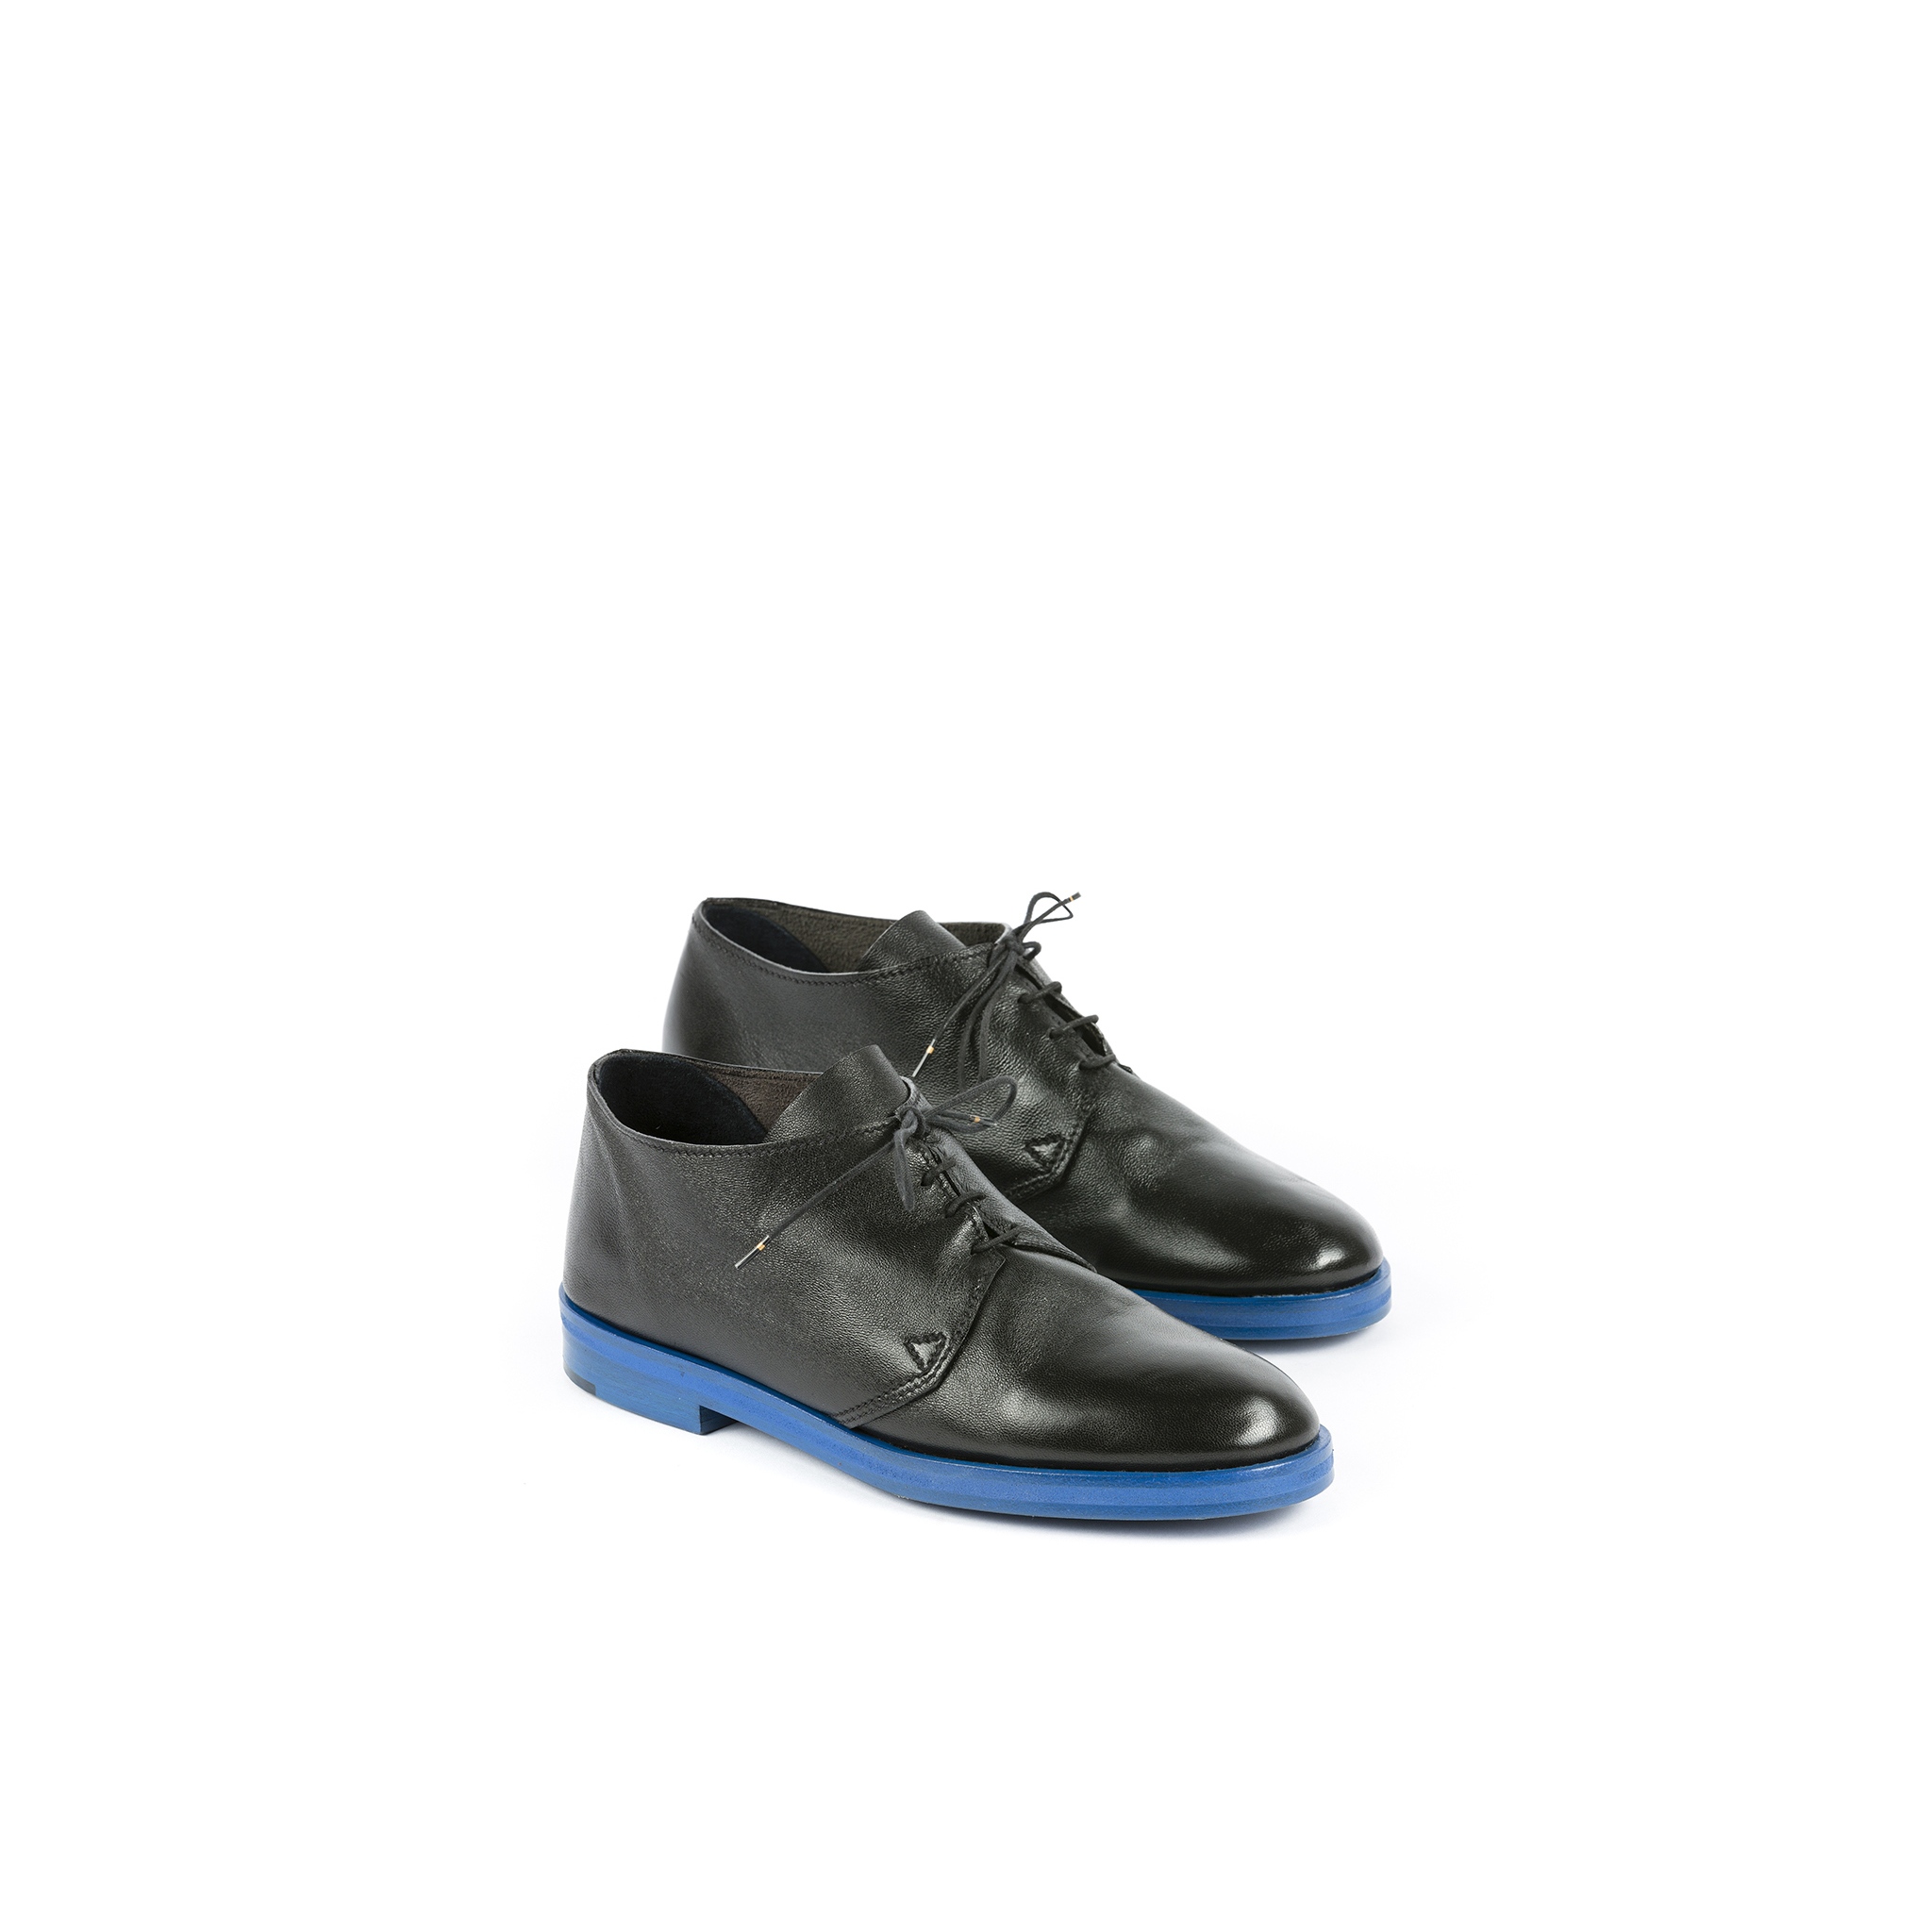 Titi Derby Shoes - Special Edition - Glossy leather - Black color